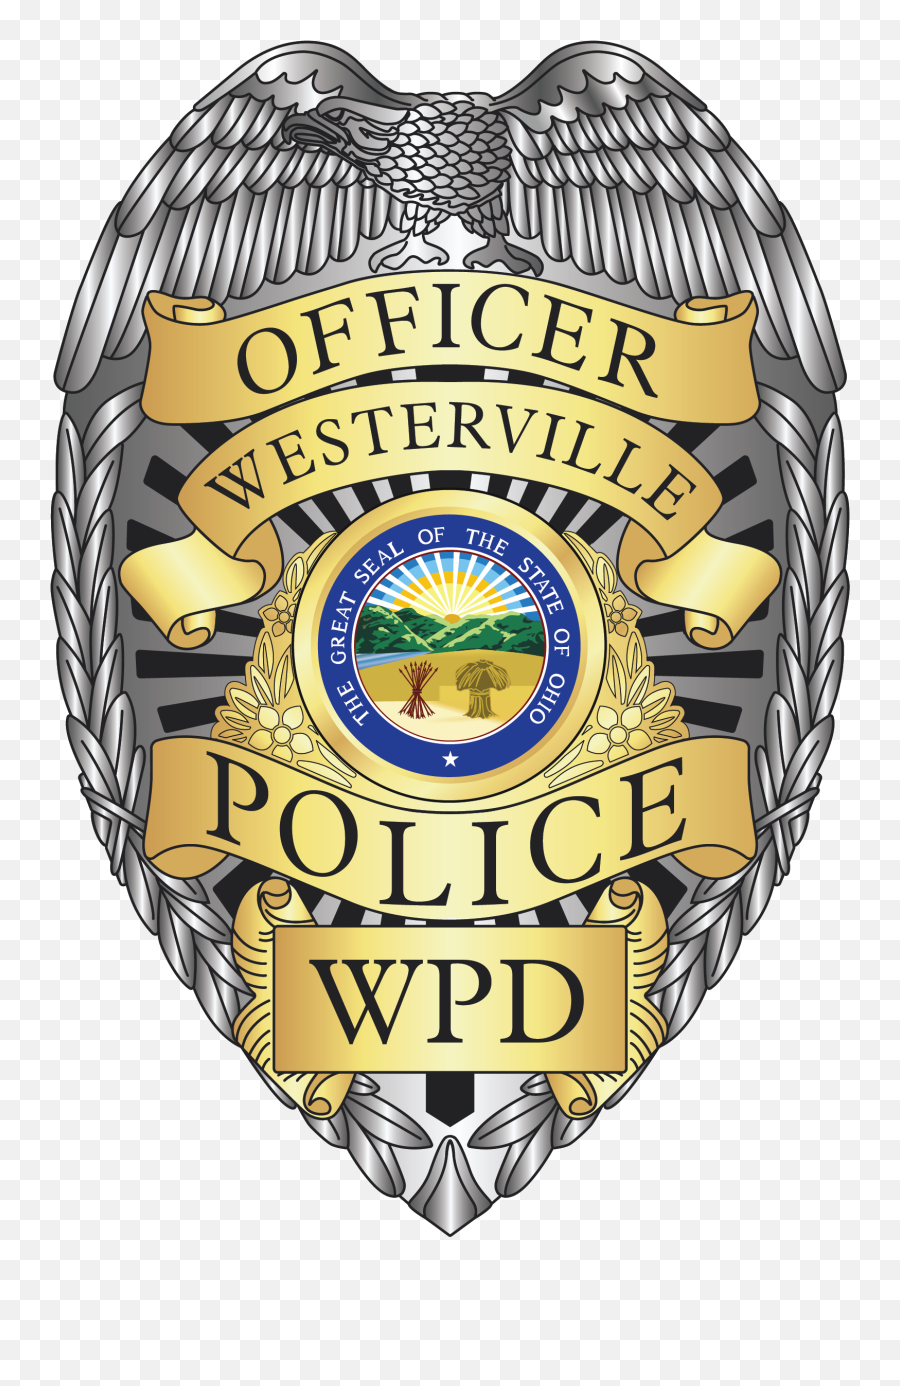 Police - Westerville Police Badge Png,Police Badge Png